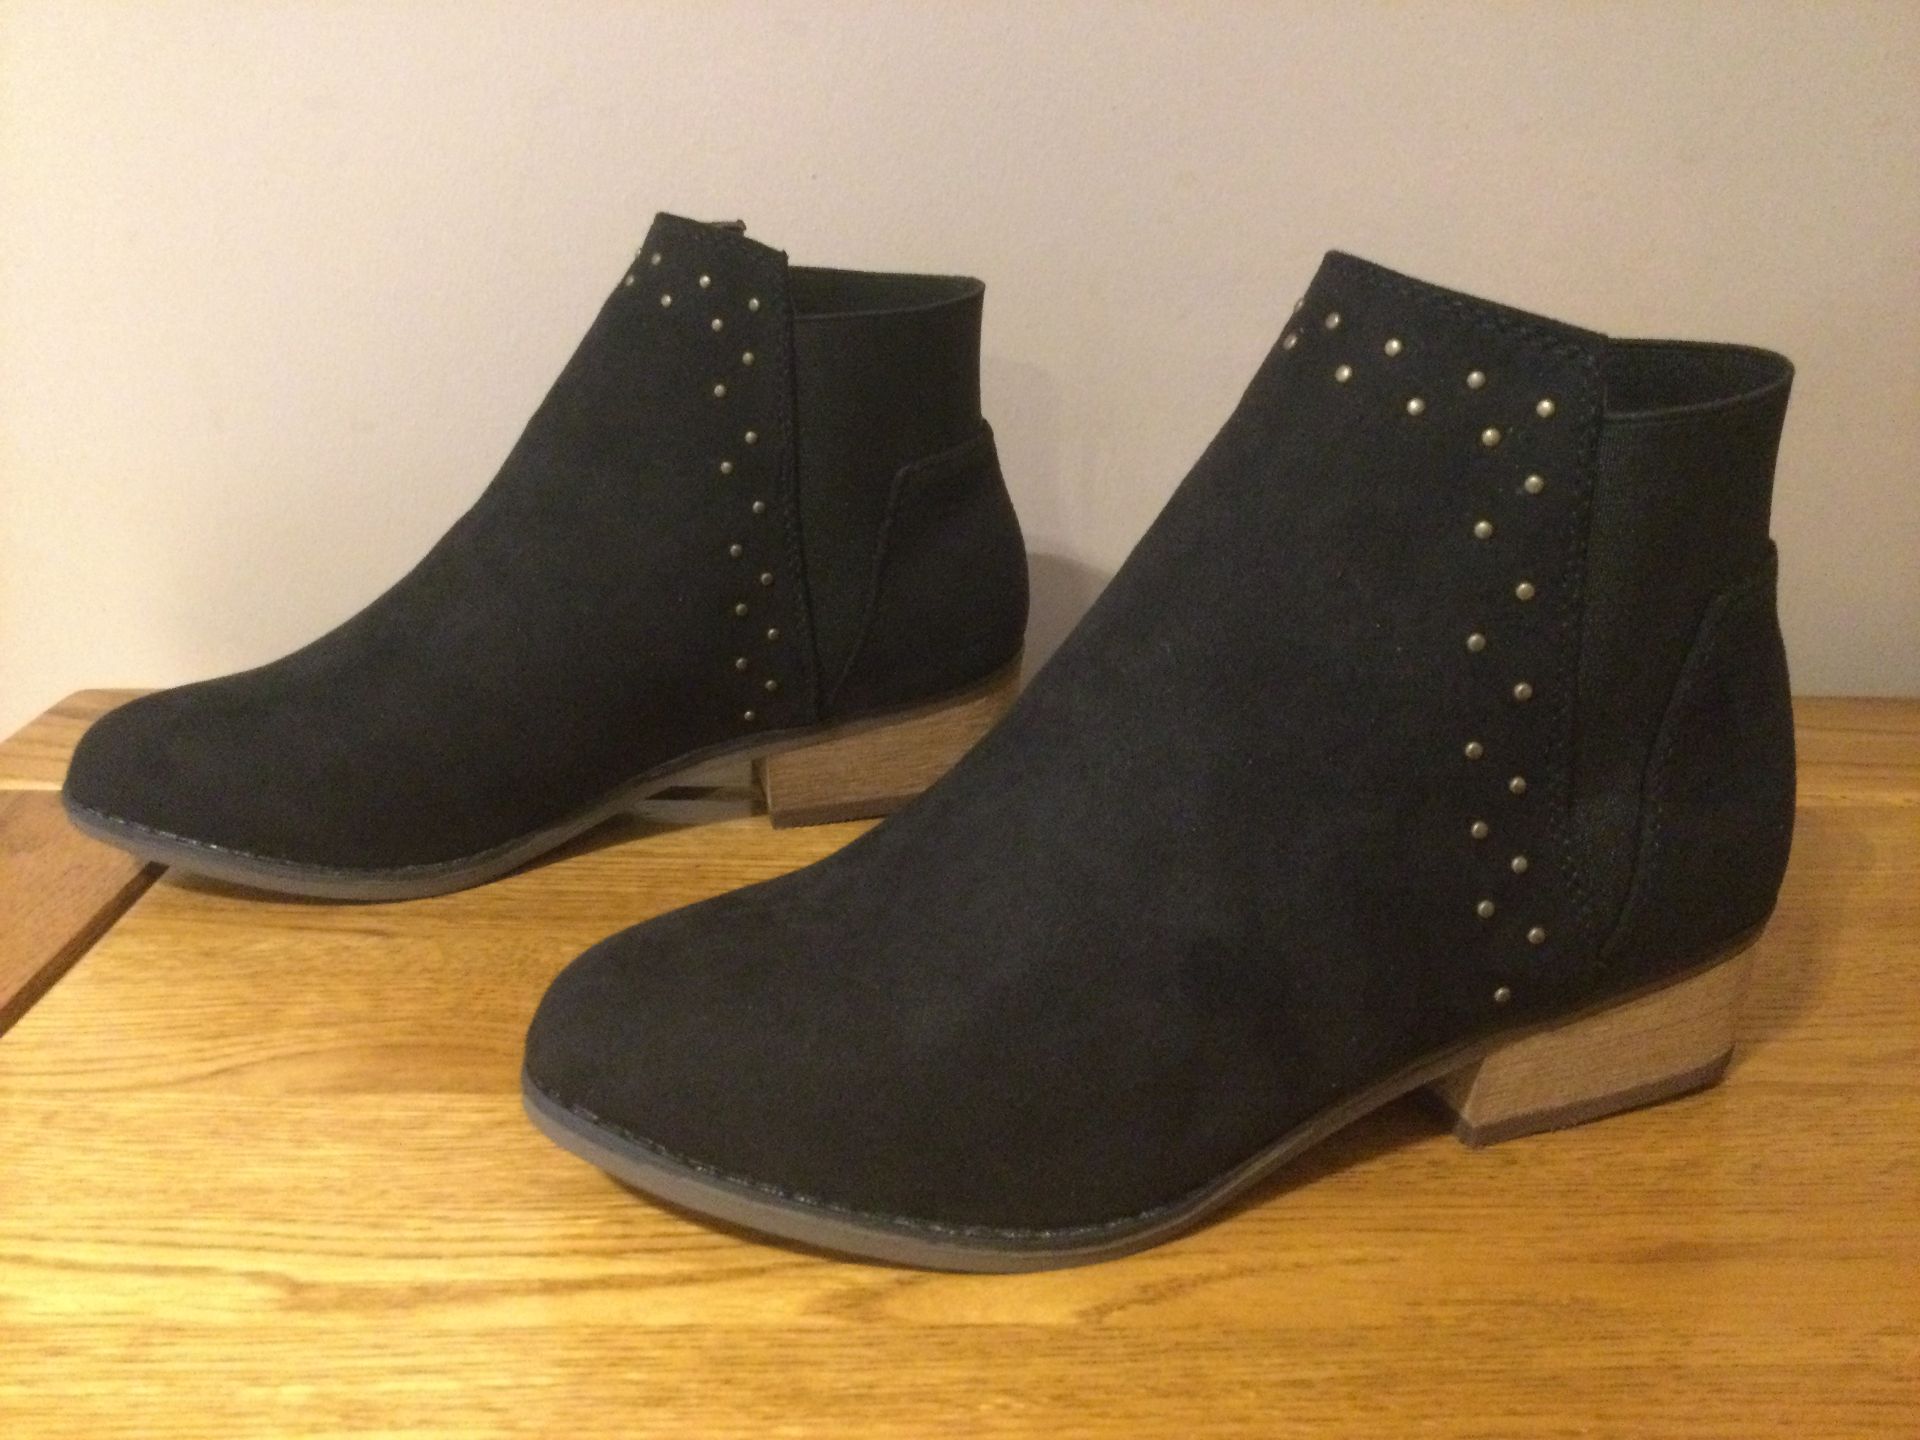 Dolcis “Wendy” Low Heel Ankle Boots, Size 6, Black - New RRP £45.99 - Image 2 of 7